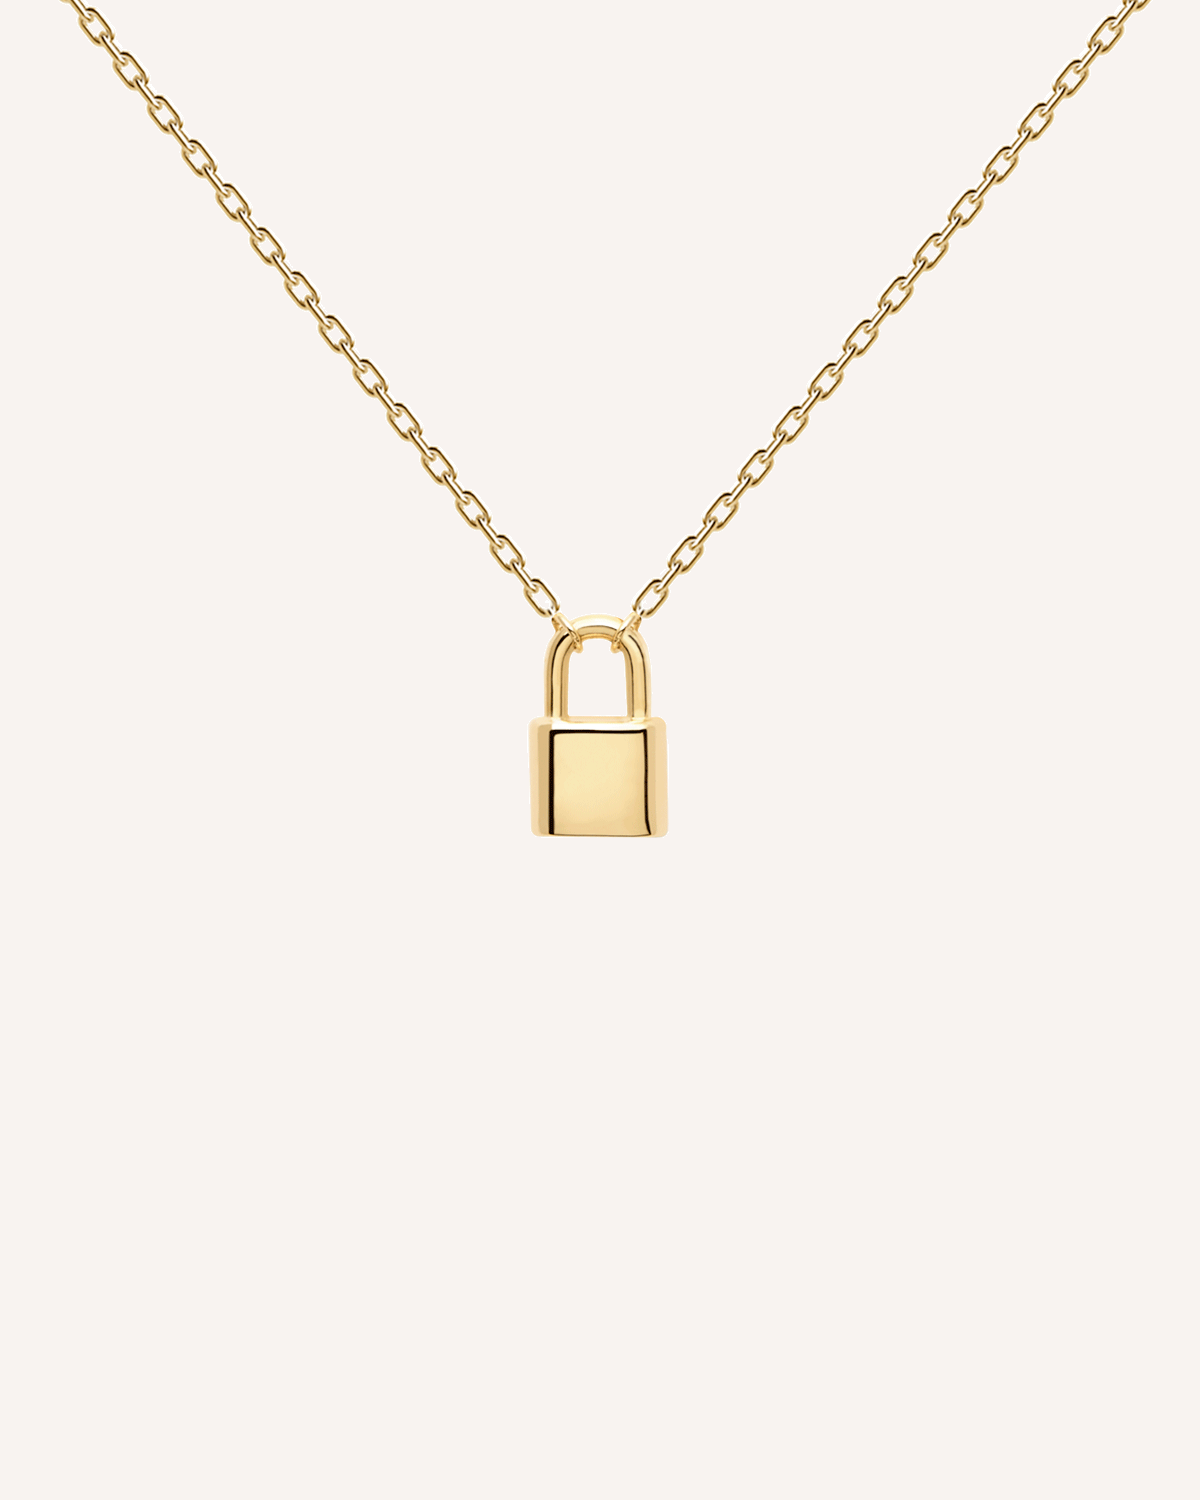 2023 Selection | Bond Necklace. Gold-plated silver necklace with padlock pendant to personalize. Get the latest arrival from PDPAOLA. Place your order safely and get this Best Seller. Free Shipping.